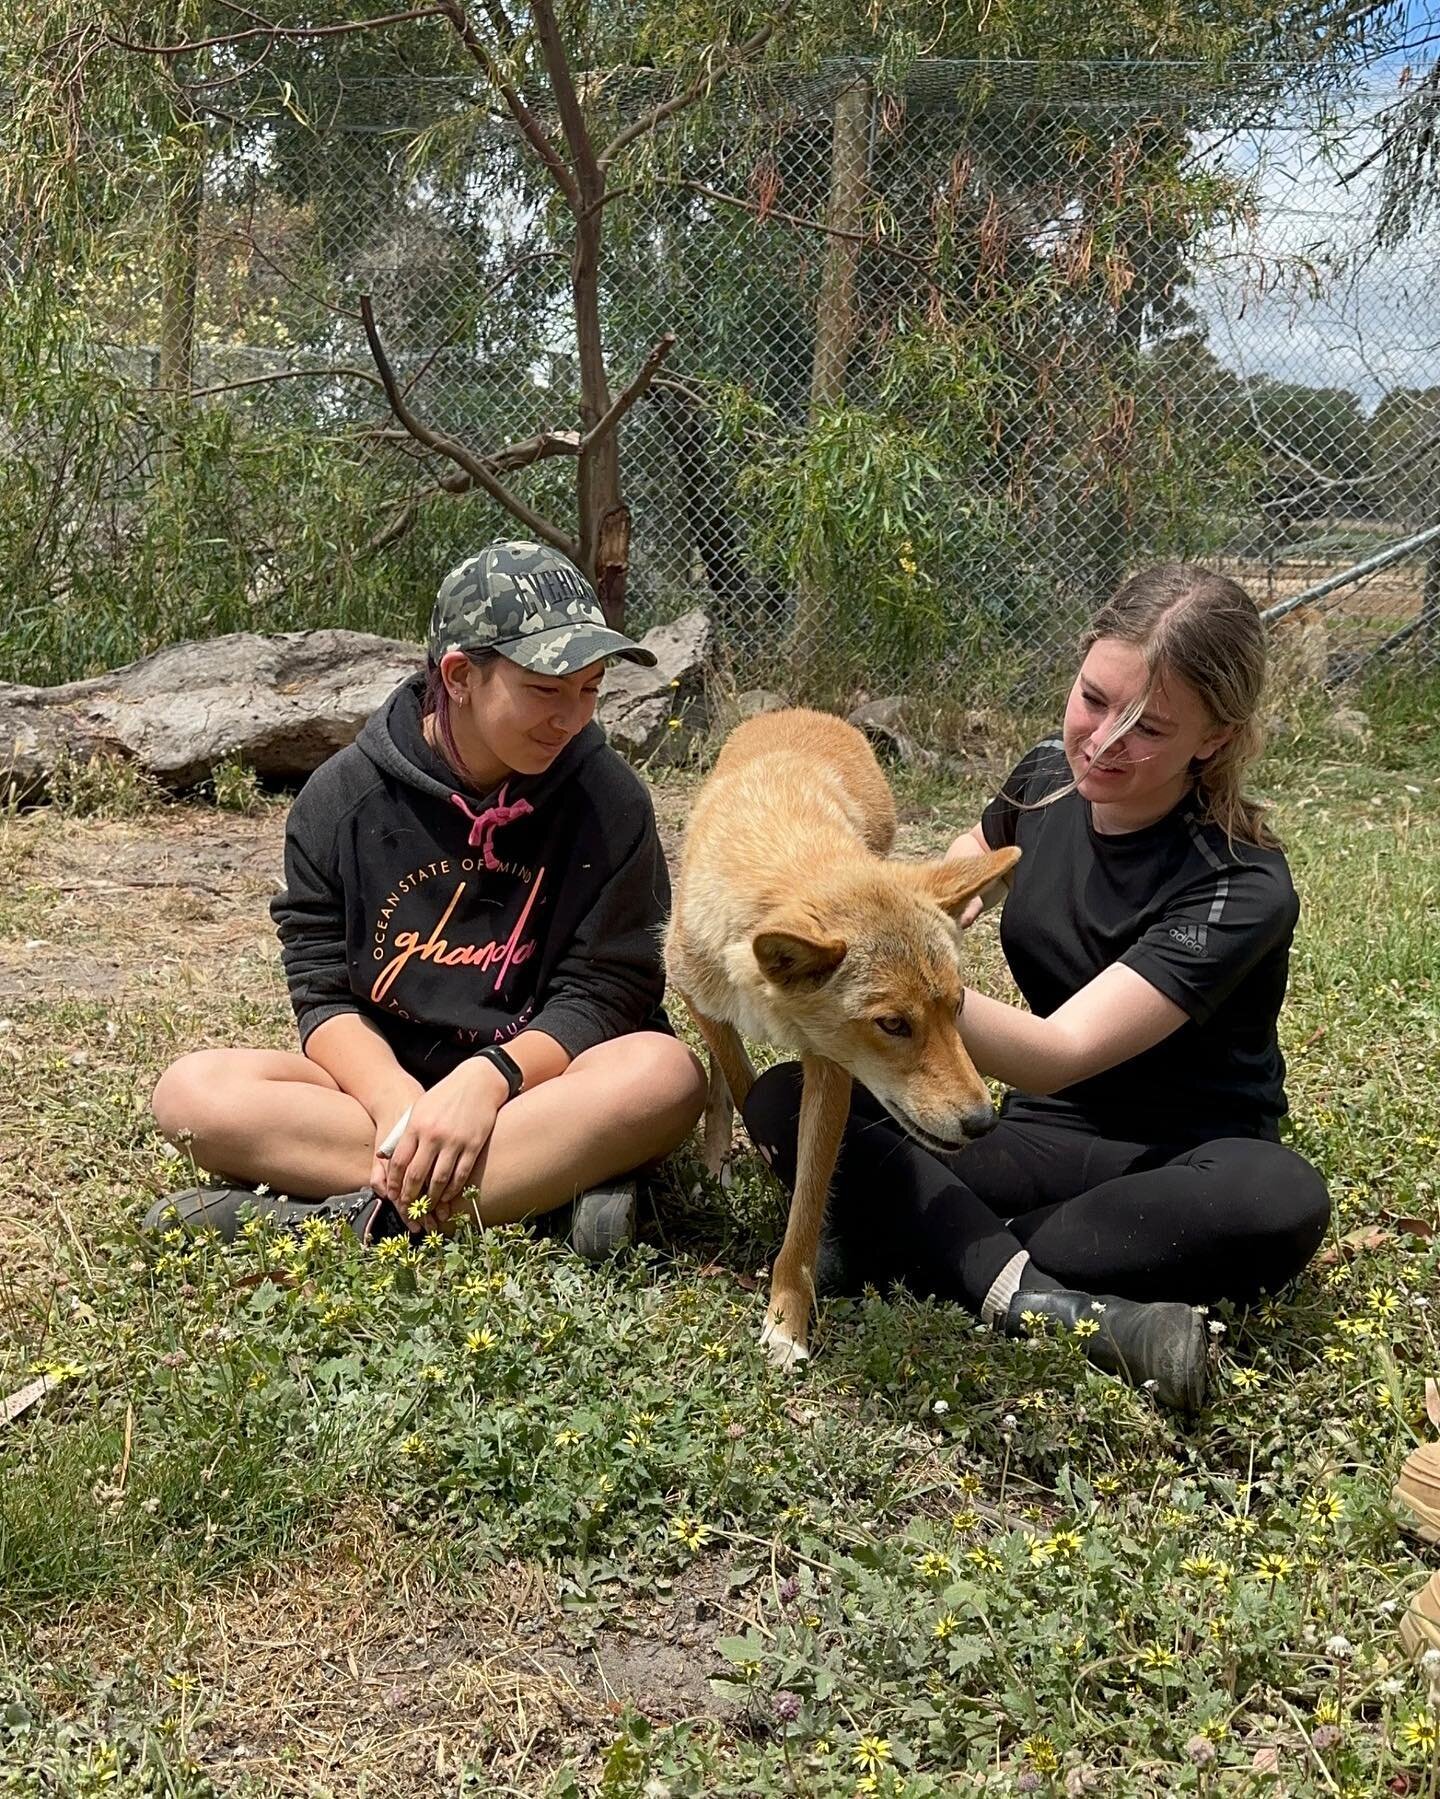 Malakai really turning up the cuteness for our dingo encounter 🐕🐕